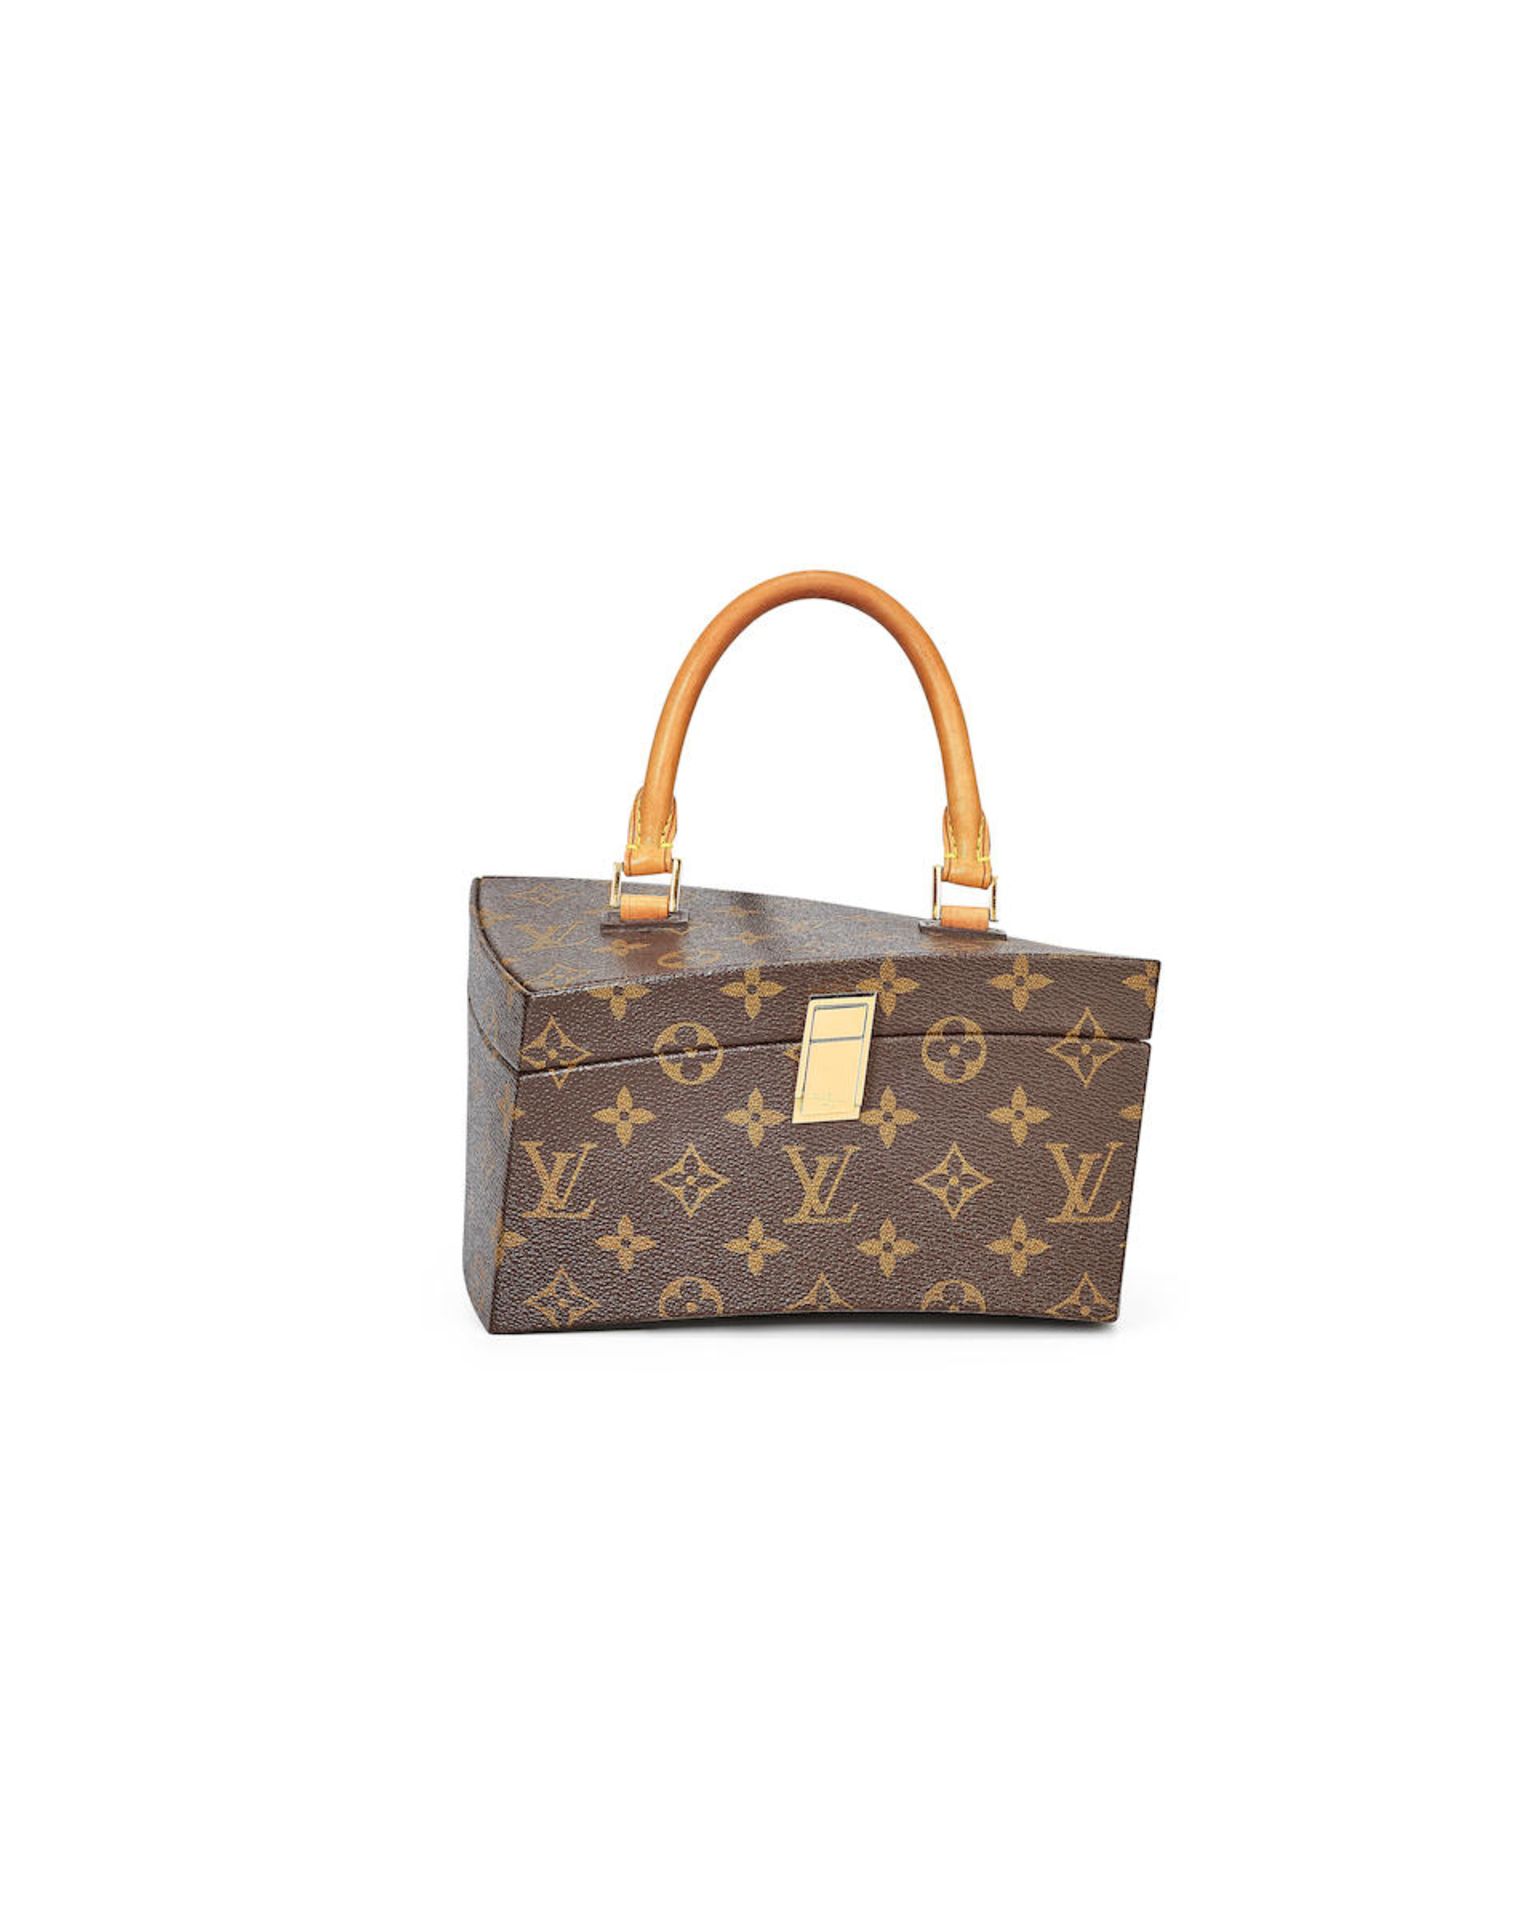 LOUIS VUITTON x FRANK GEHRY: LIMITED EDITION MONOGRAM TWISTED BOX WITH GOLD TONED HARDWARE (Incl... - Bild 2 aus 2